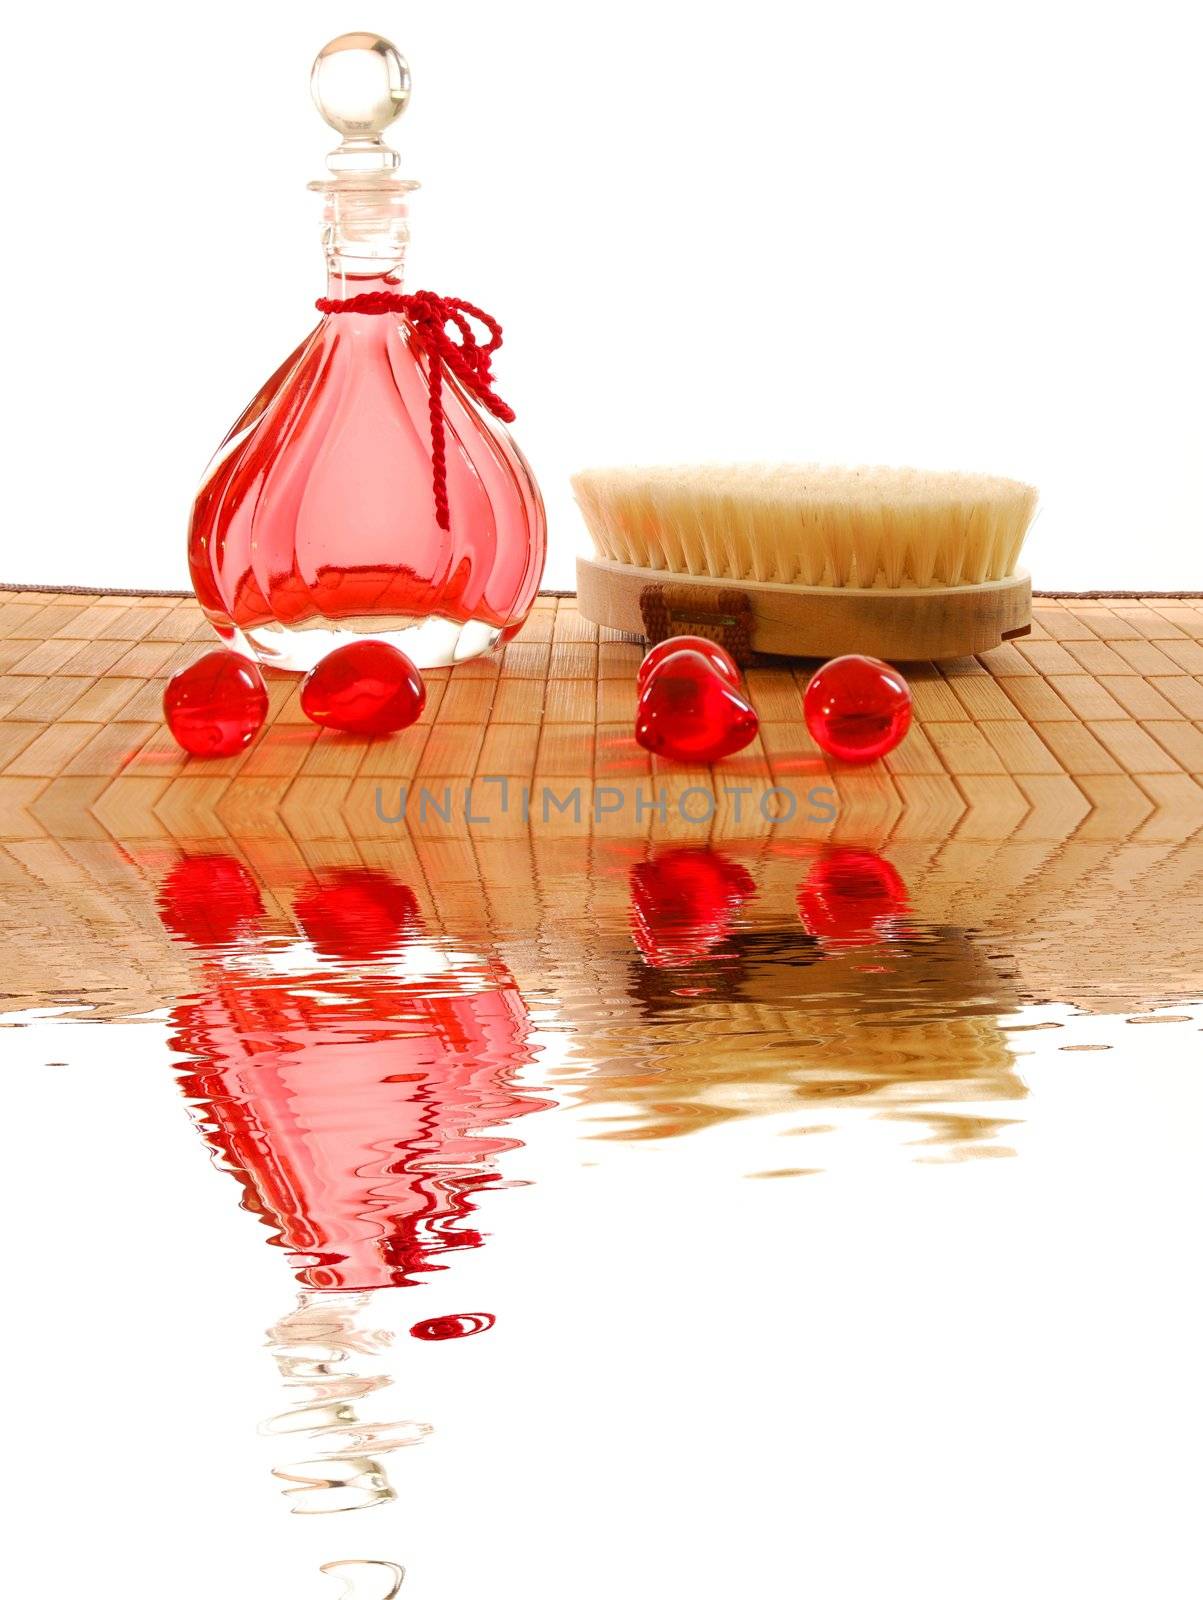 spa still life and water reflection showing wellness concept